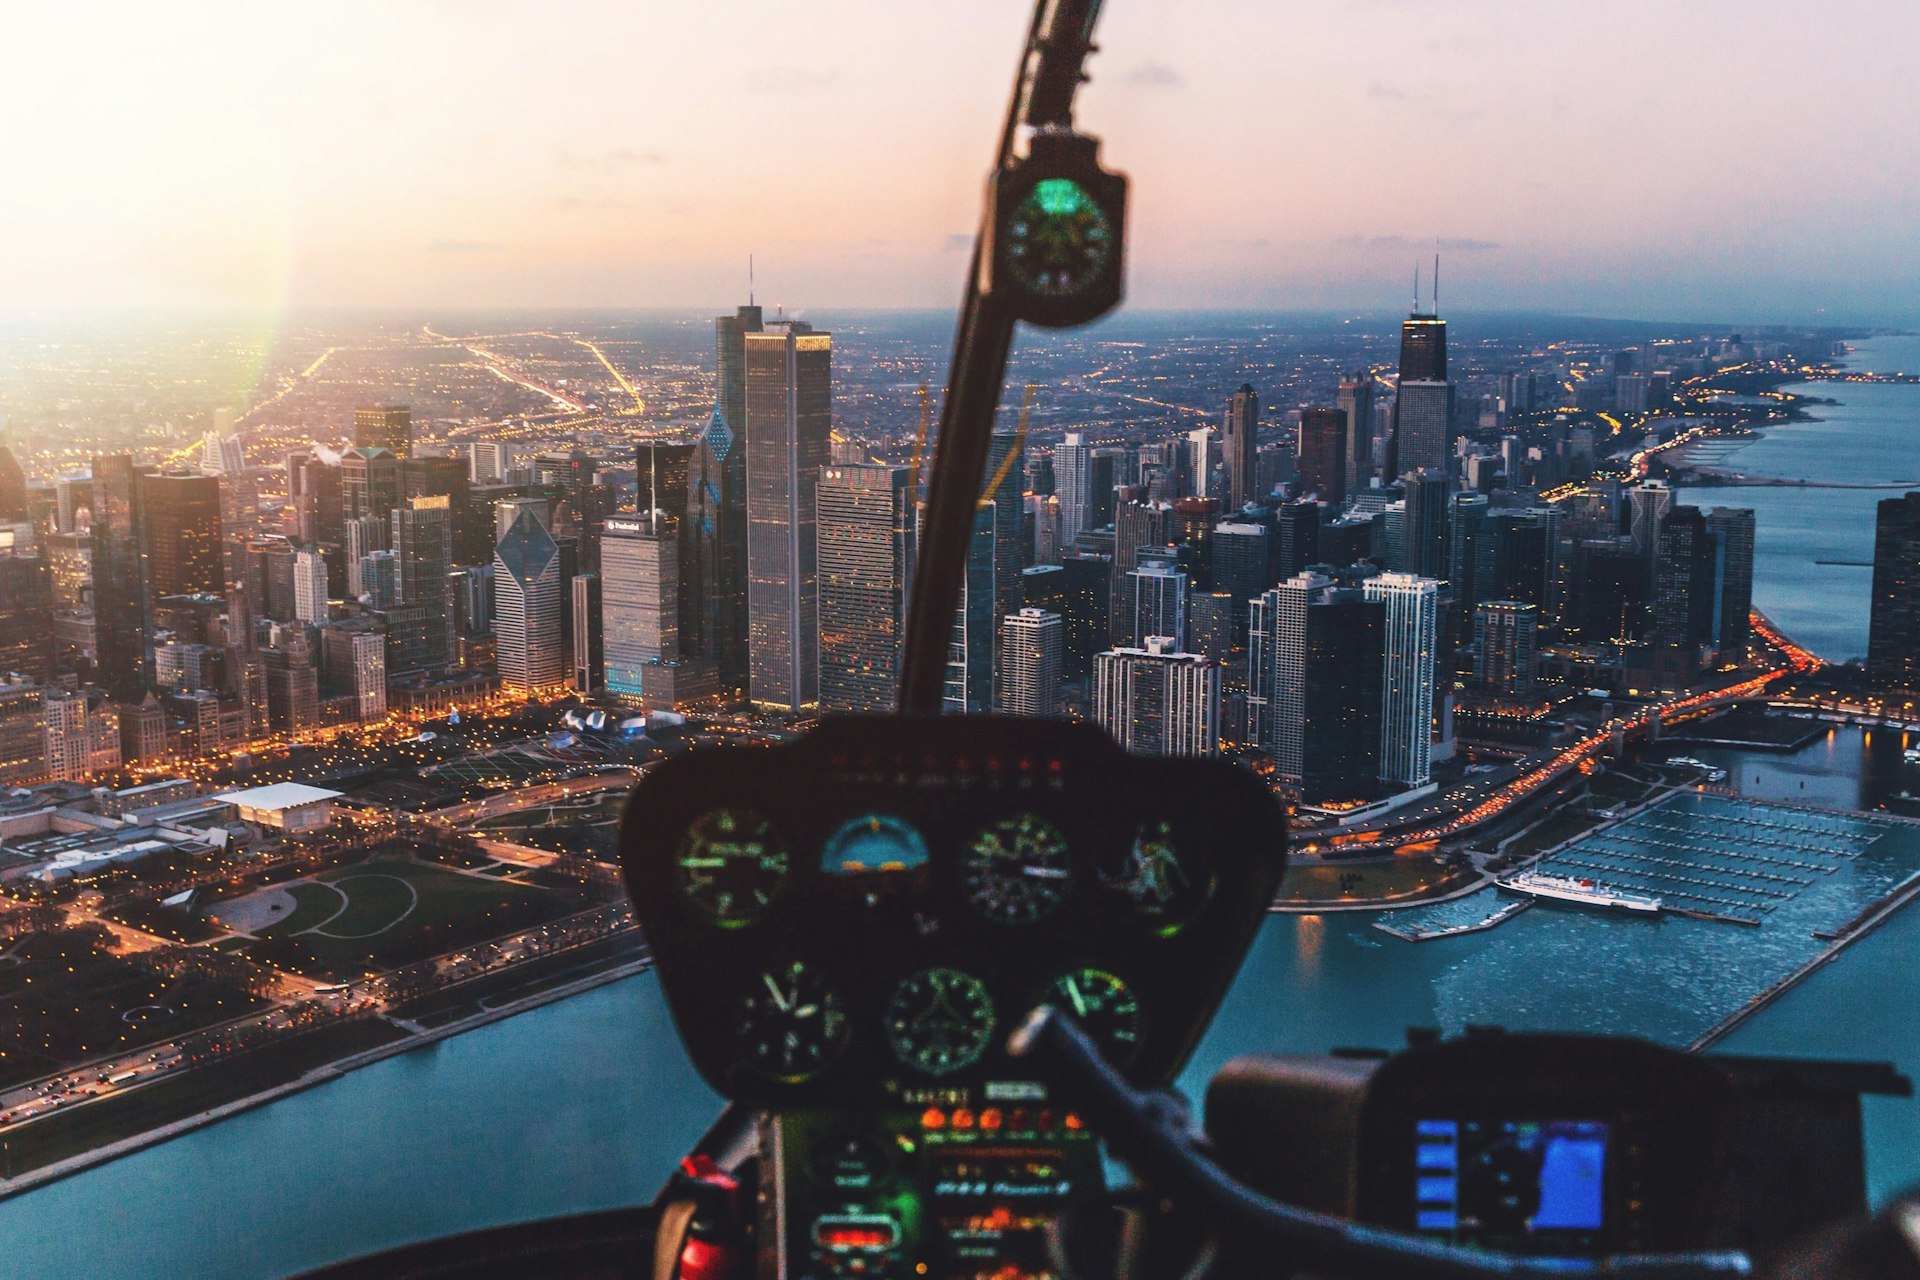 How To Fly A Helicopter: The 5 Key Steps